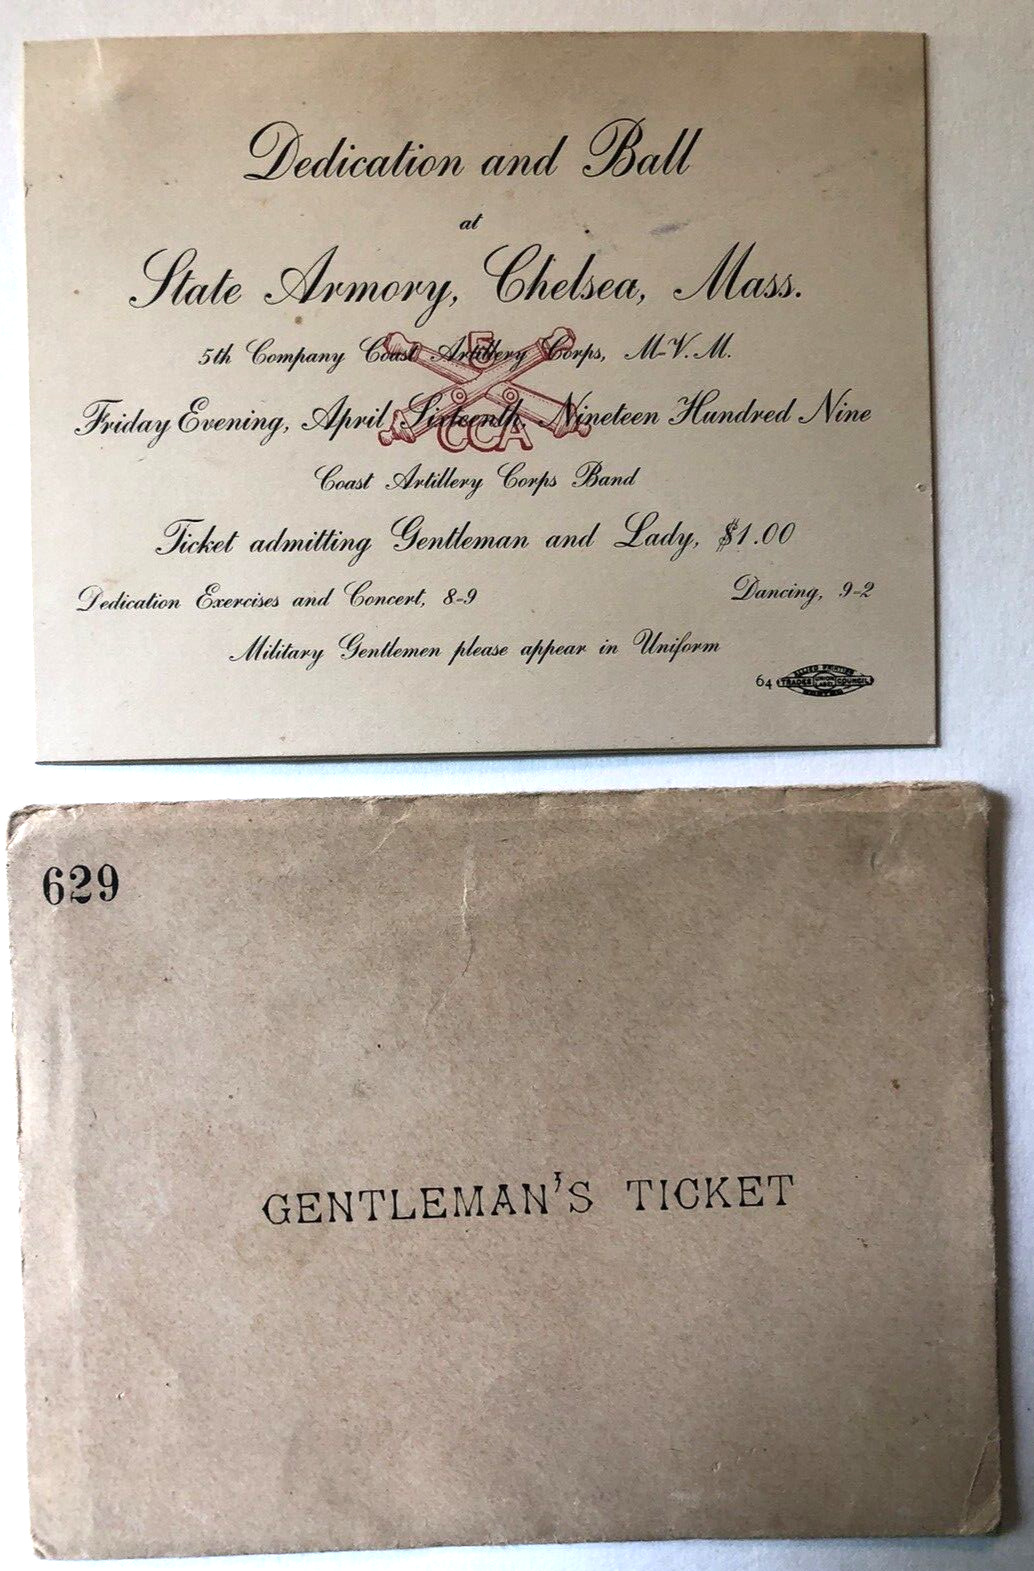 CHELSEA MA 1909 GENTELMAN’S TICKET for Dedication & Ball at State Armory RARE